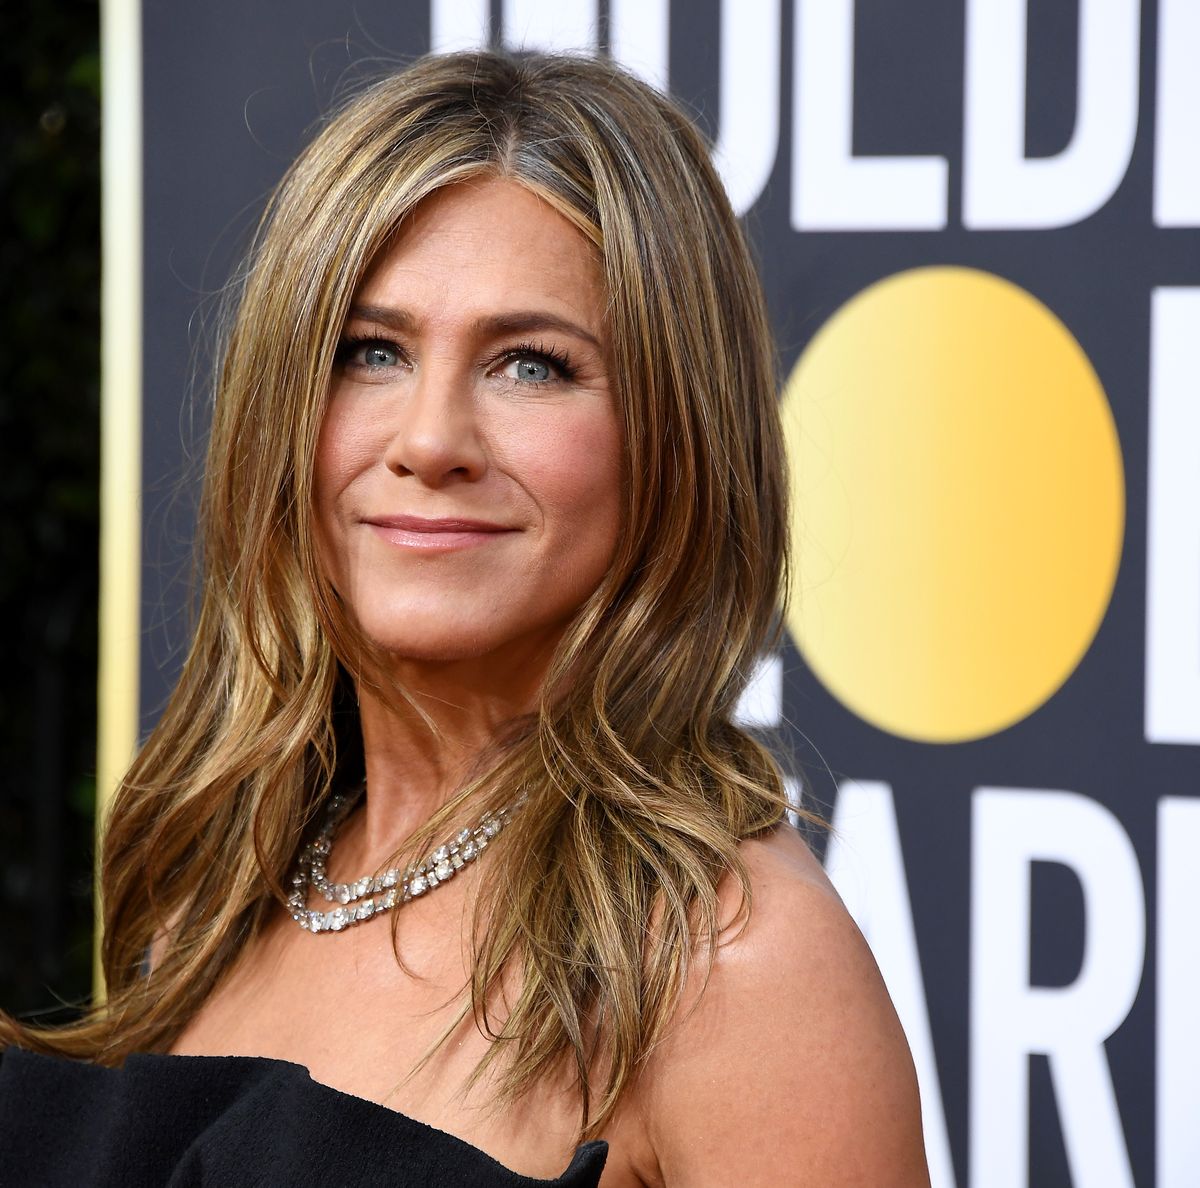 How Jennifer Aniston Wears Ankle Boots During Summer